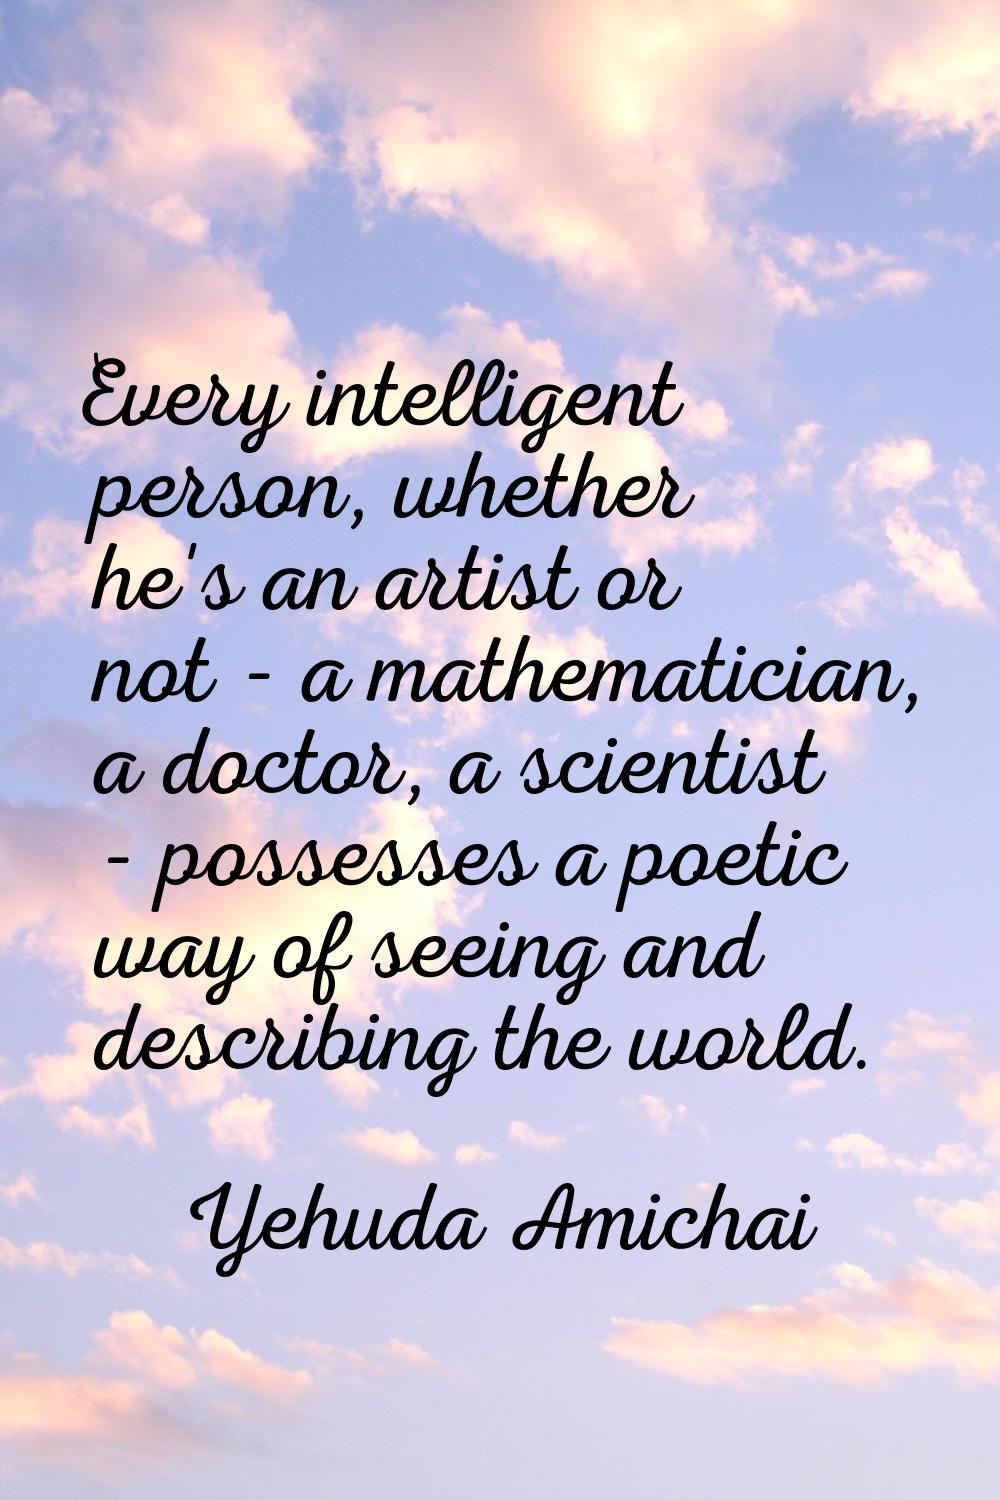 Every intelligent person, whether he's an artist or not - a mathematician, a doctor, a scientist - 